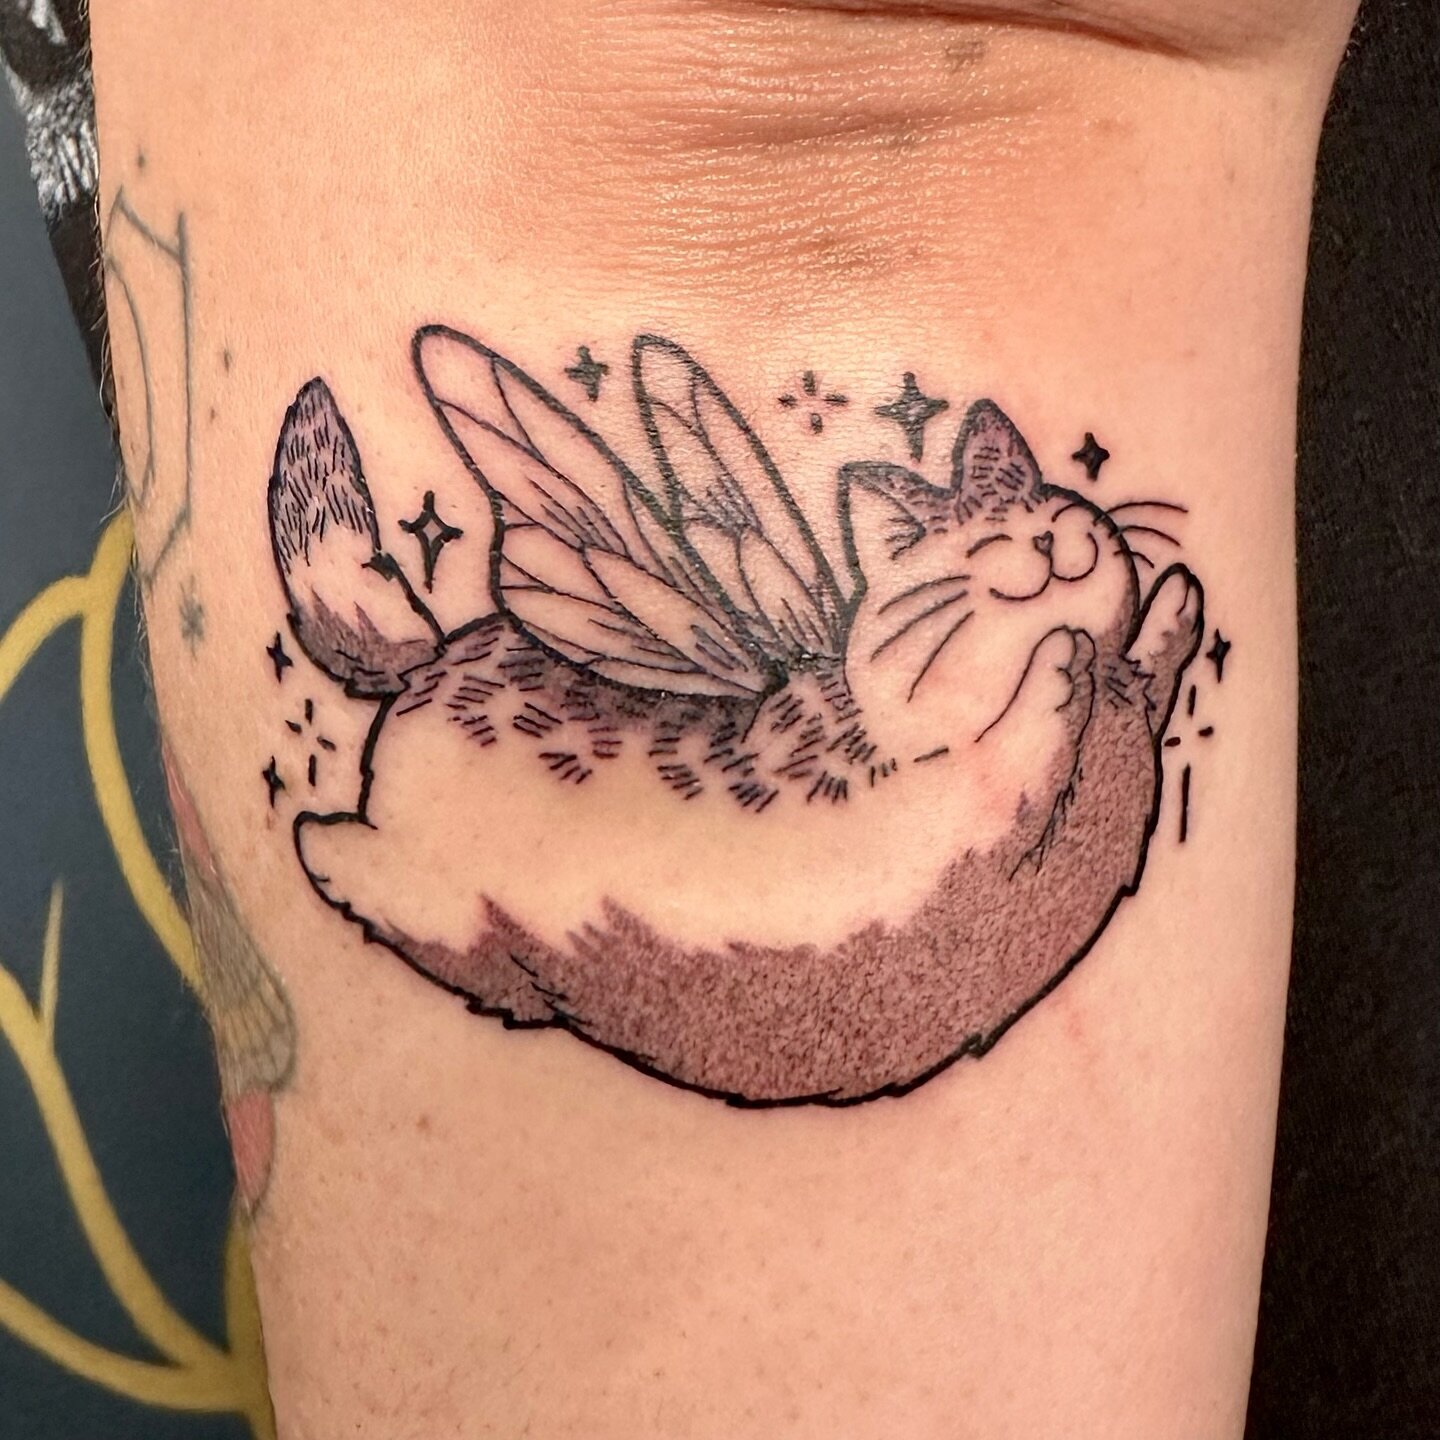 Happy lil fairy kitty from my flash for Quinn 🐈✨
.
.
.
#yyctattoo #yyctattoos #yycliving #tattoo #flashtattoo #tattooartist #asiantattooartist #filipinotattooartist #tattooed #tattooer #lineworktattoo #blackworktattoo #illustrativetattoo #ink #inked